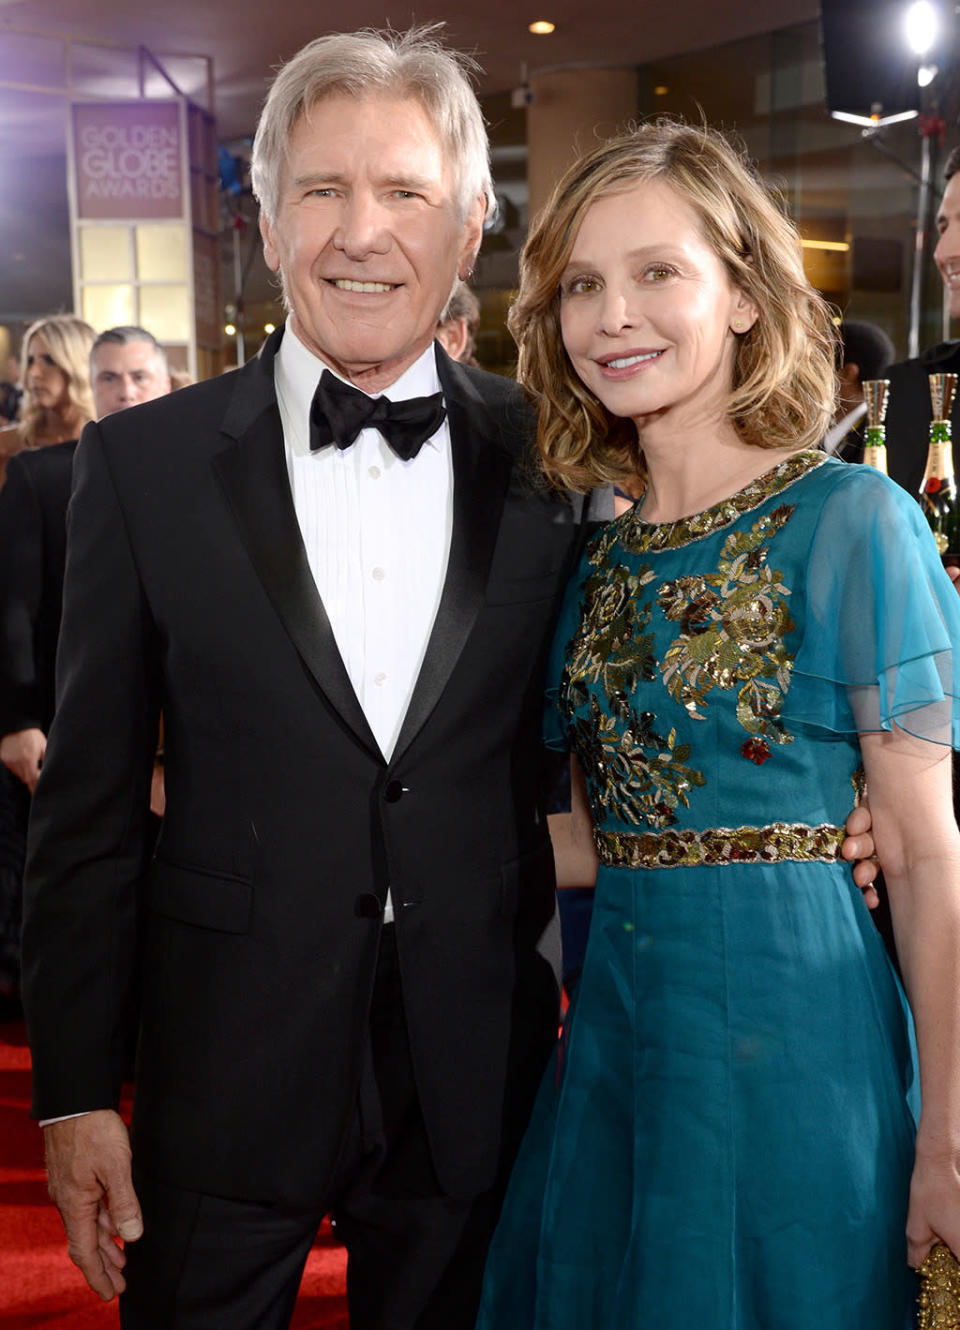 Harrison Ford and Calista Flockhart: 22 years